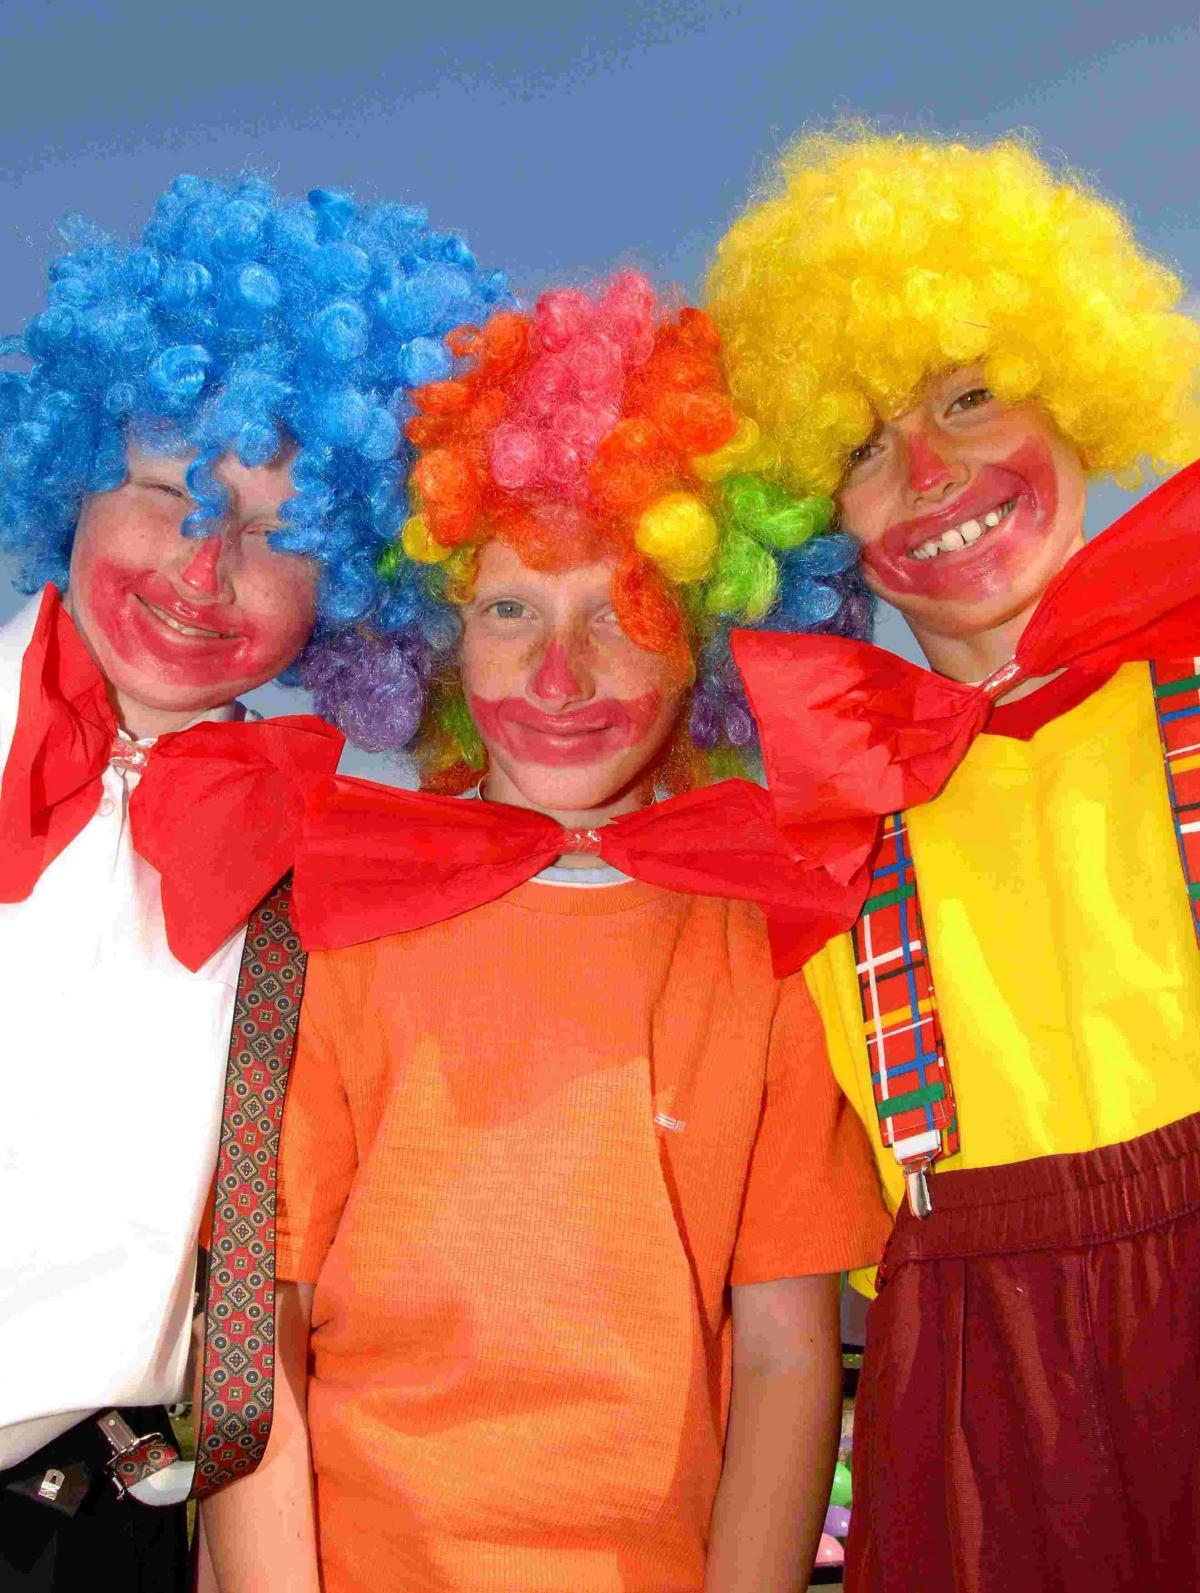 Clowning around at the 2006 Zouch School Fete, Tidworth.